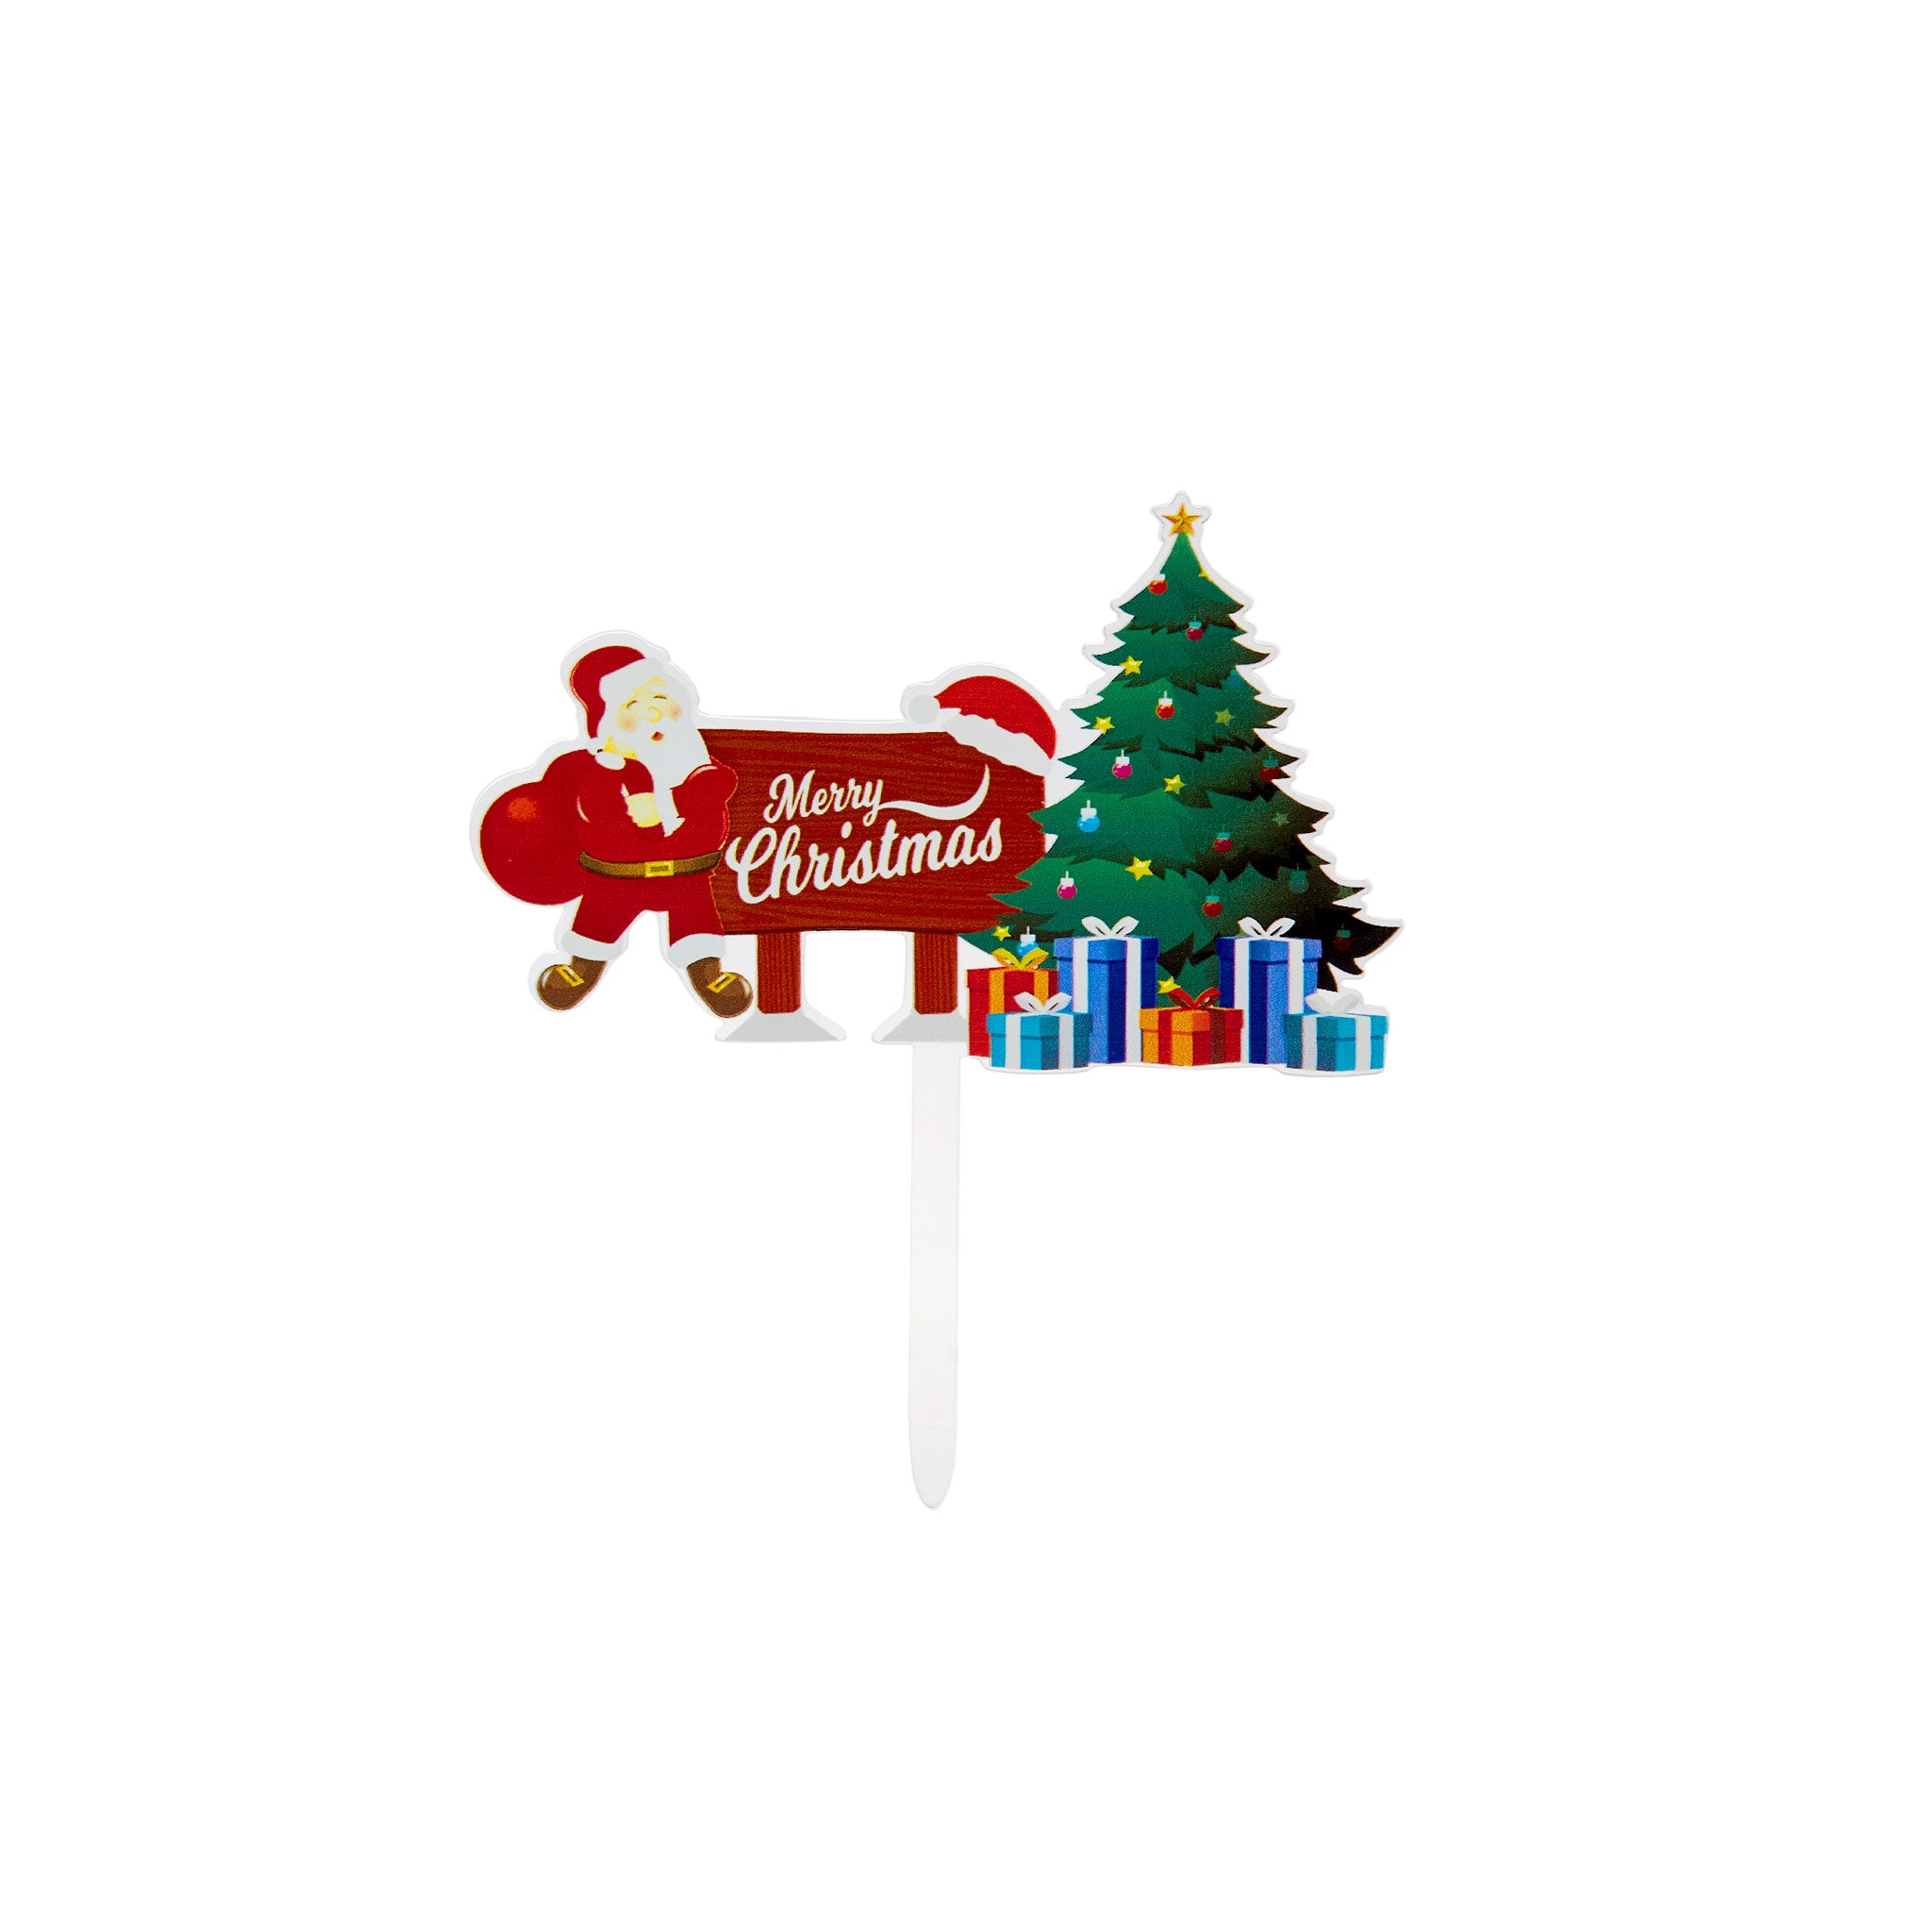 Merry Christmas Cake Topper 1 Piece - Hotpack Global